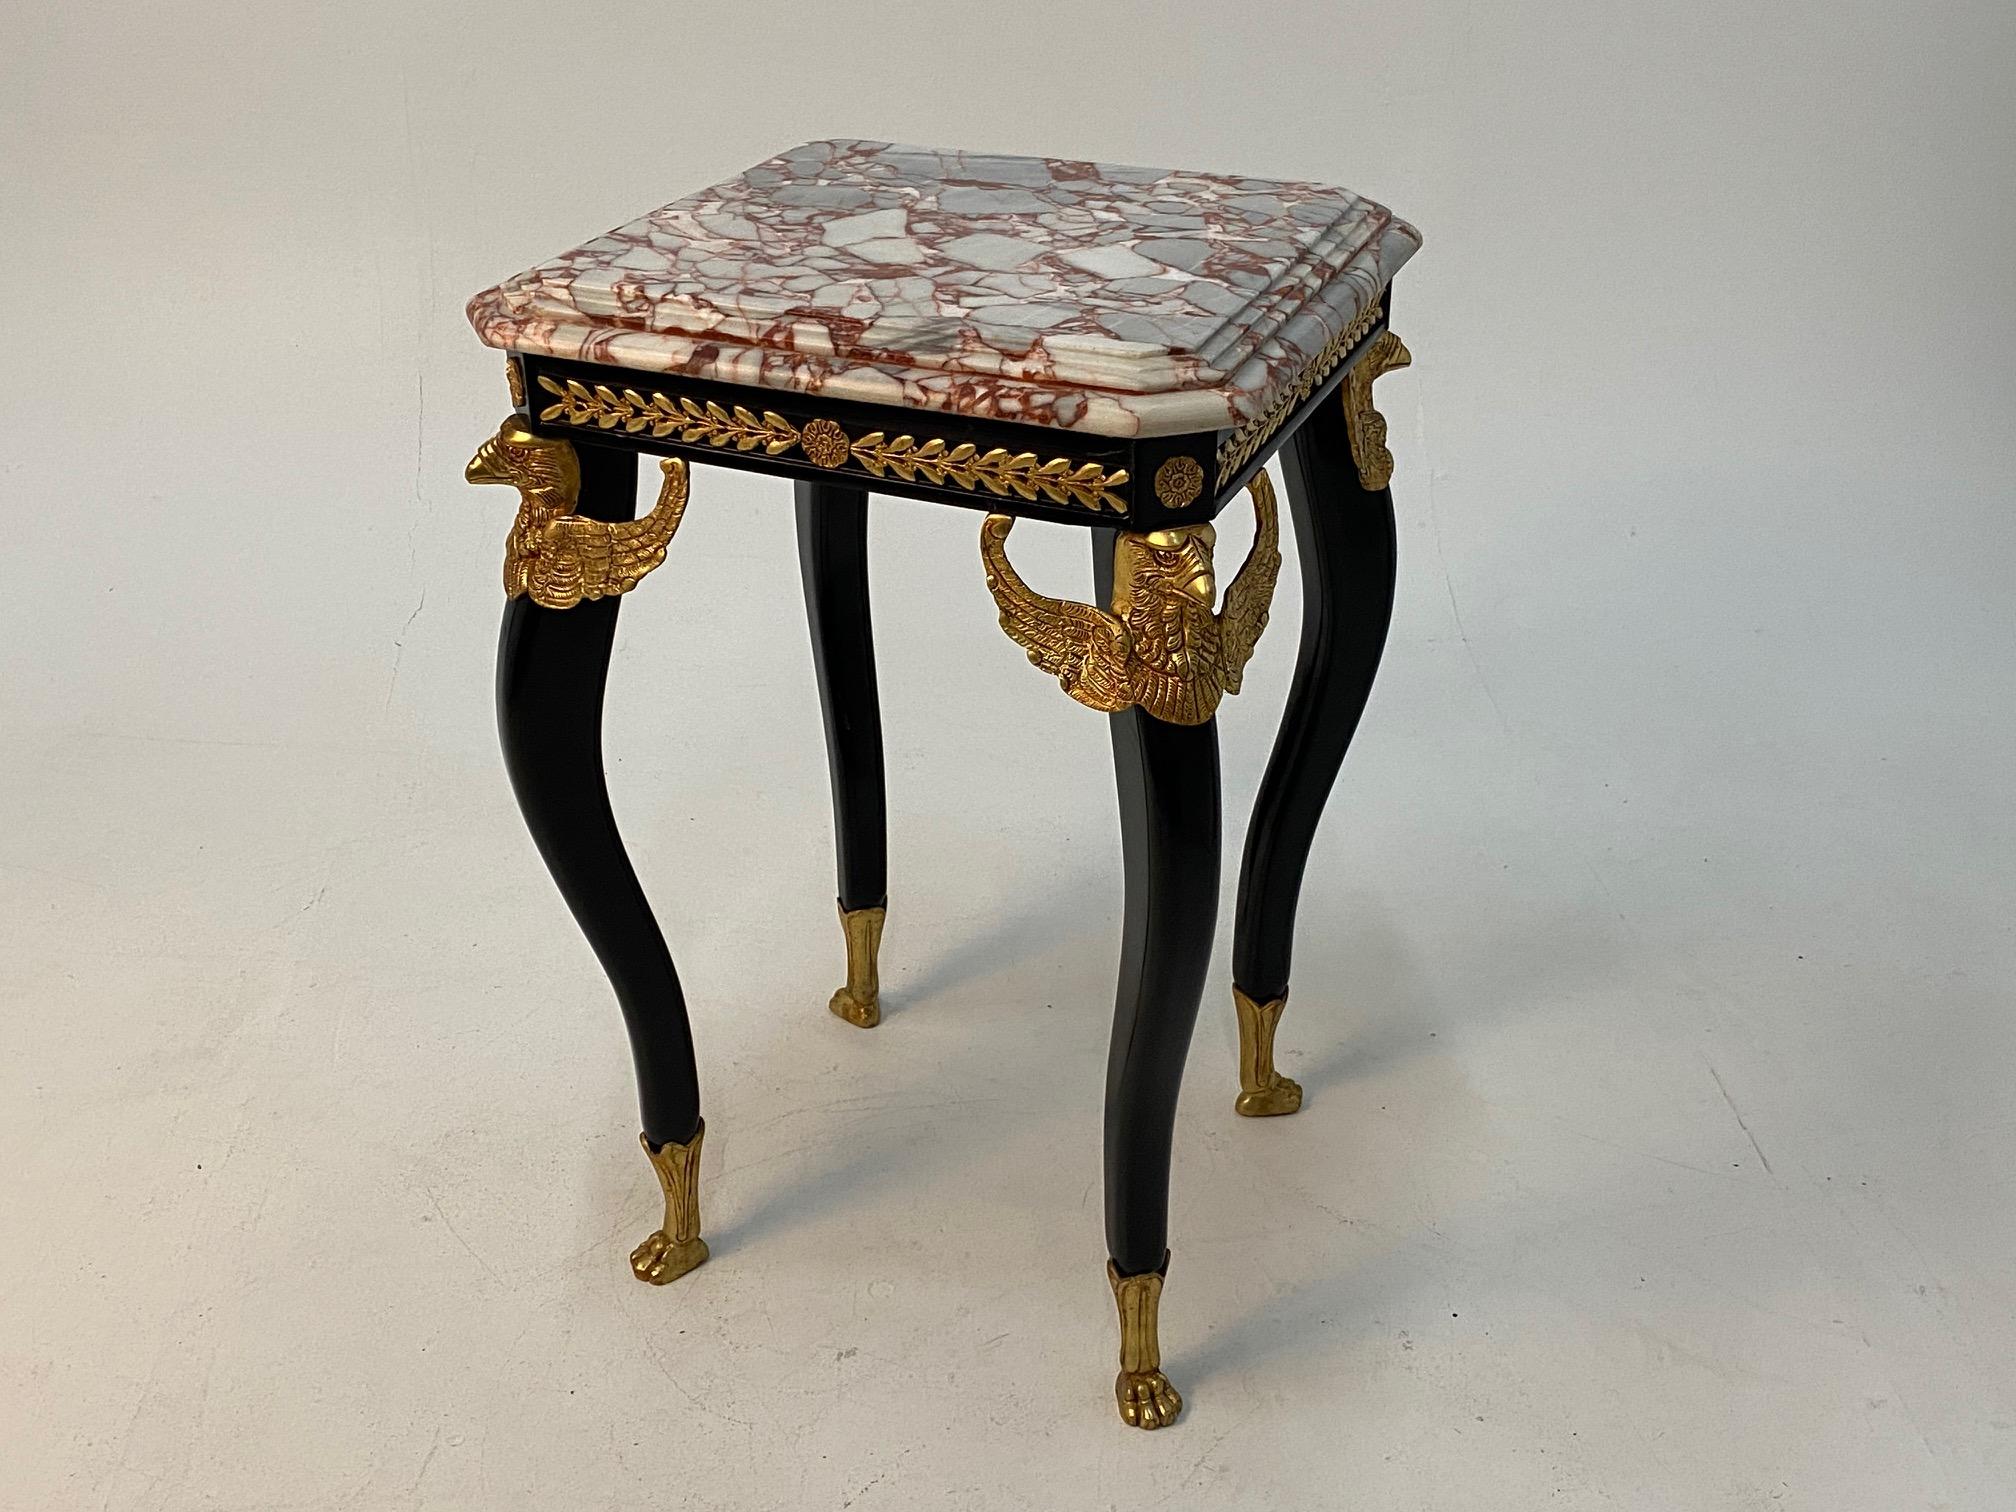 Elegant and very fancy Maison Jansen style French end table having ebonized and gilt bronze base with amazing eagle shaped mounts and paw feet. Top is a beautiful stepped marble with lively grain.